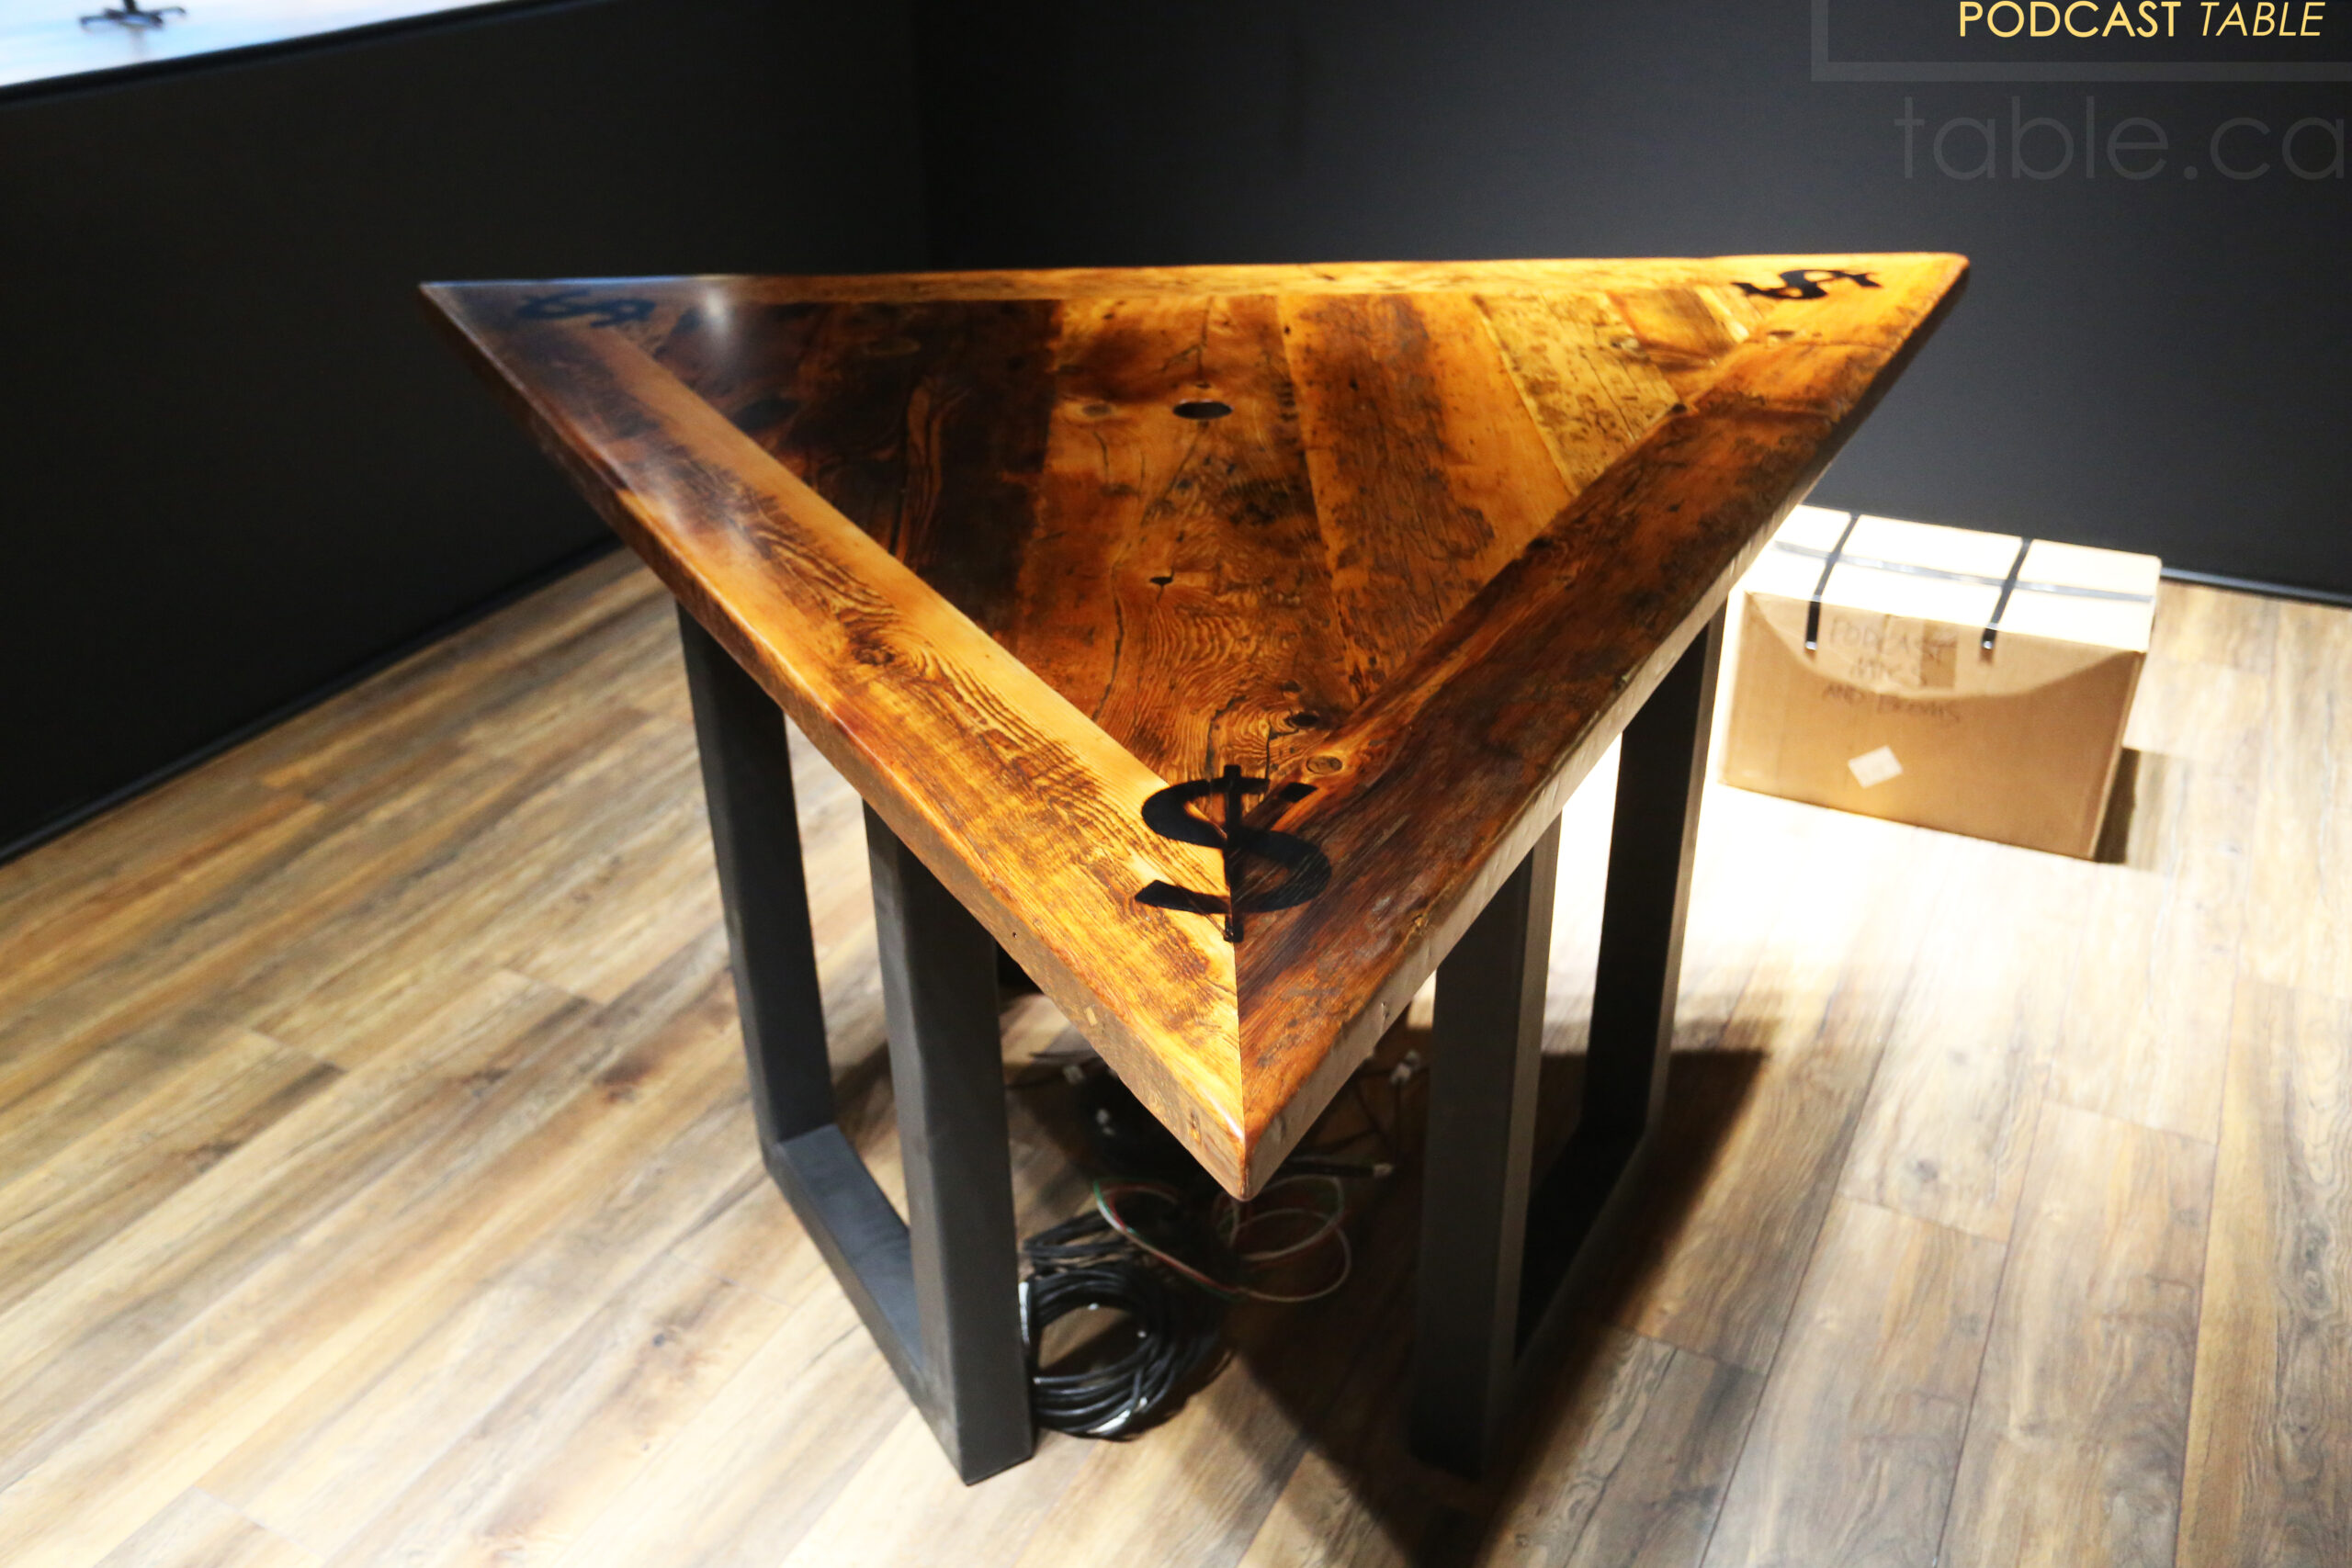 Project Summary: 6’ Per Side Triangle Reclaimed Ontario Barnwood Podcast Table - Made for a Burlington, Ontario home – 36” height – 3 Metal U Shaped Posts - Mitred Corners - Old Growth Hemlock Threshing Floor Construction - Original edges & distressing maintained - Premium epoxy + satin polyurethane finish – Centre Grommet Hole for Electronics - Custom Logo Brand Burn Embedded - www.table.ca